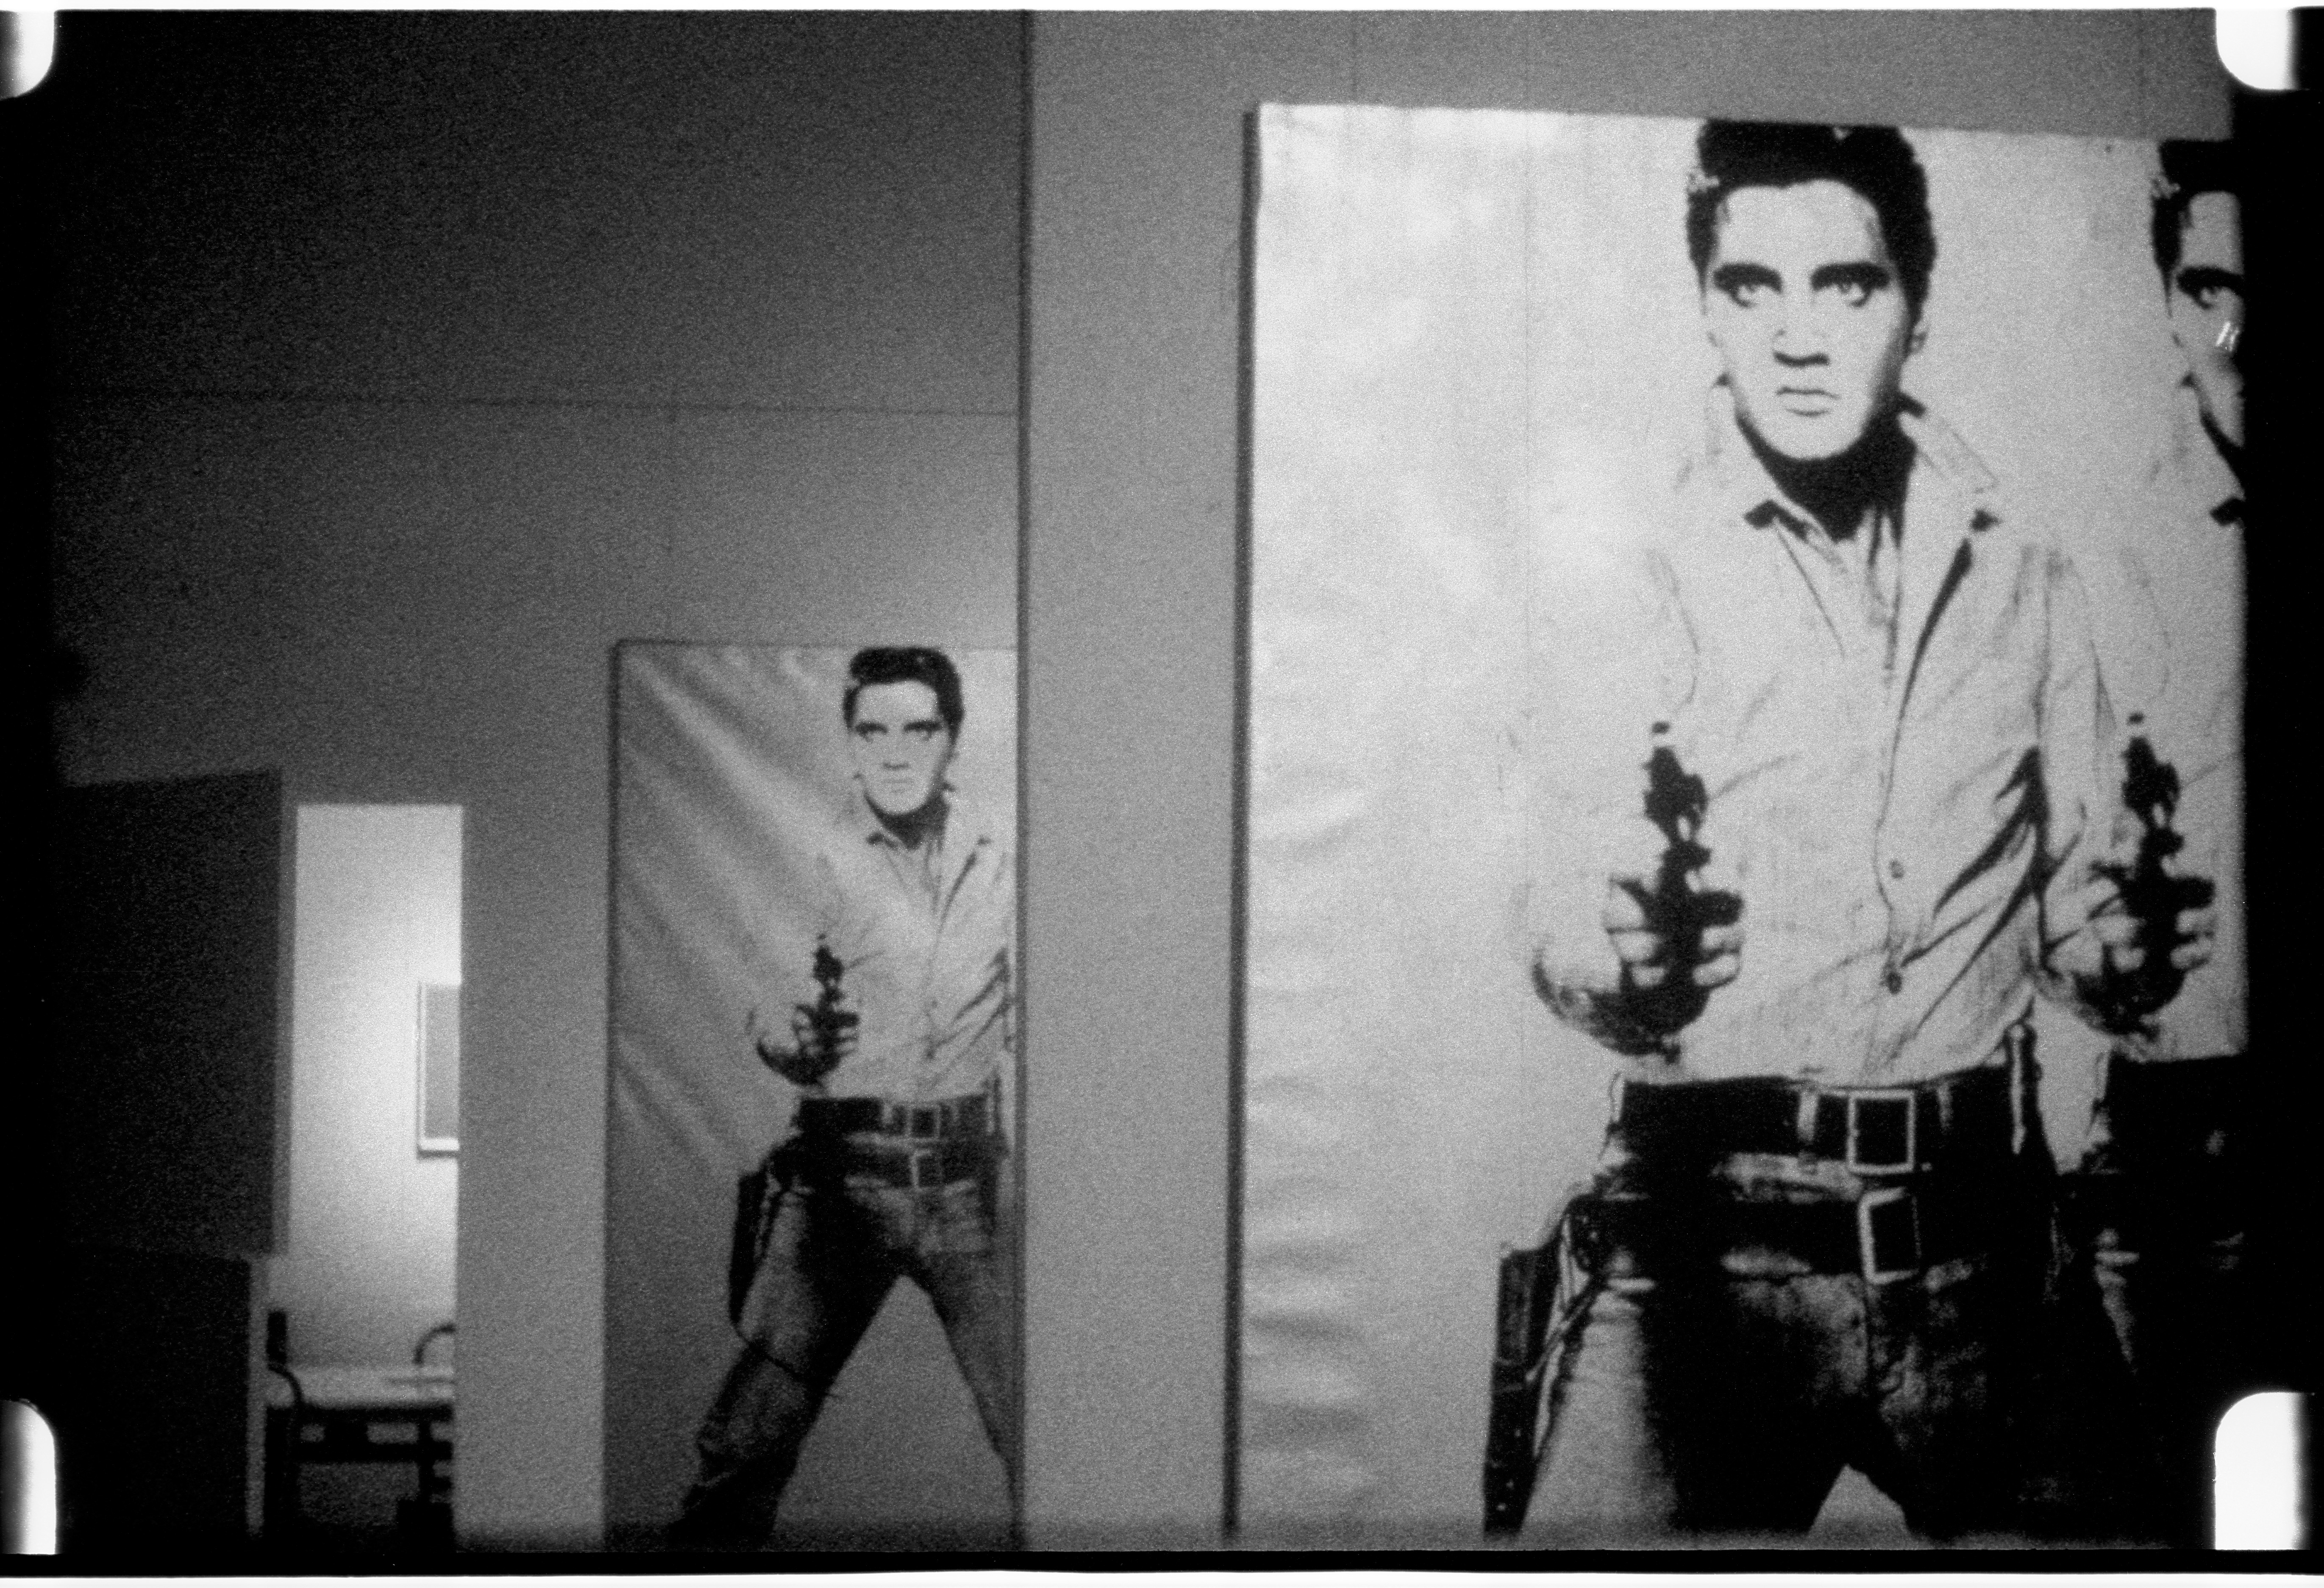 Elvis at Ferus, 1963. 16mm, b&w, silent; 4.0 min. @ 16 fps, 3.5 min. @ 18 fps © 2018 The Andy Warhol Museum, Pittsburgh, PA, a museum of Carnegie Institute. All rights reserved.